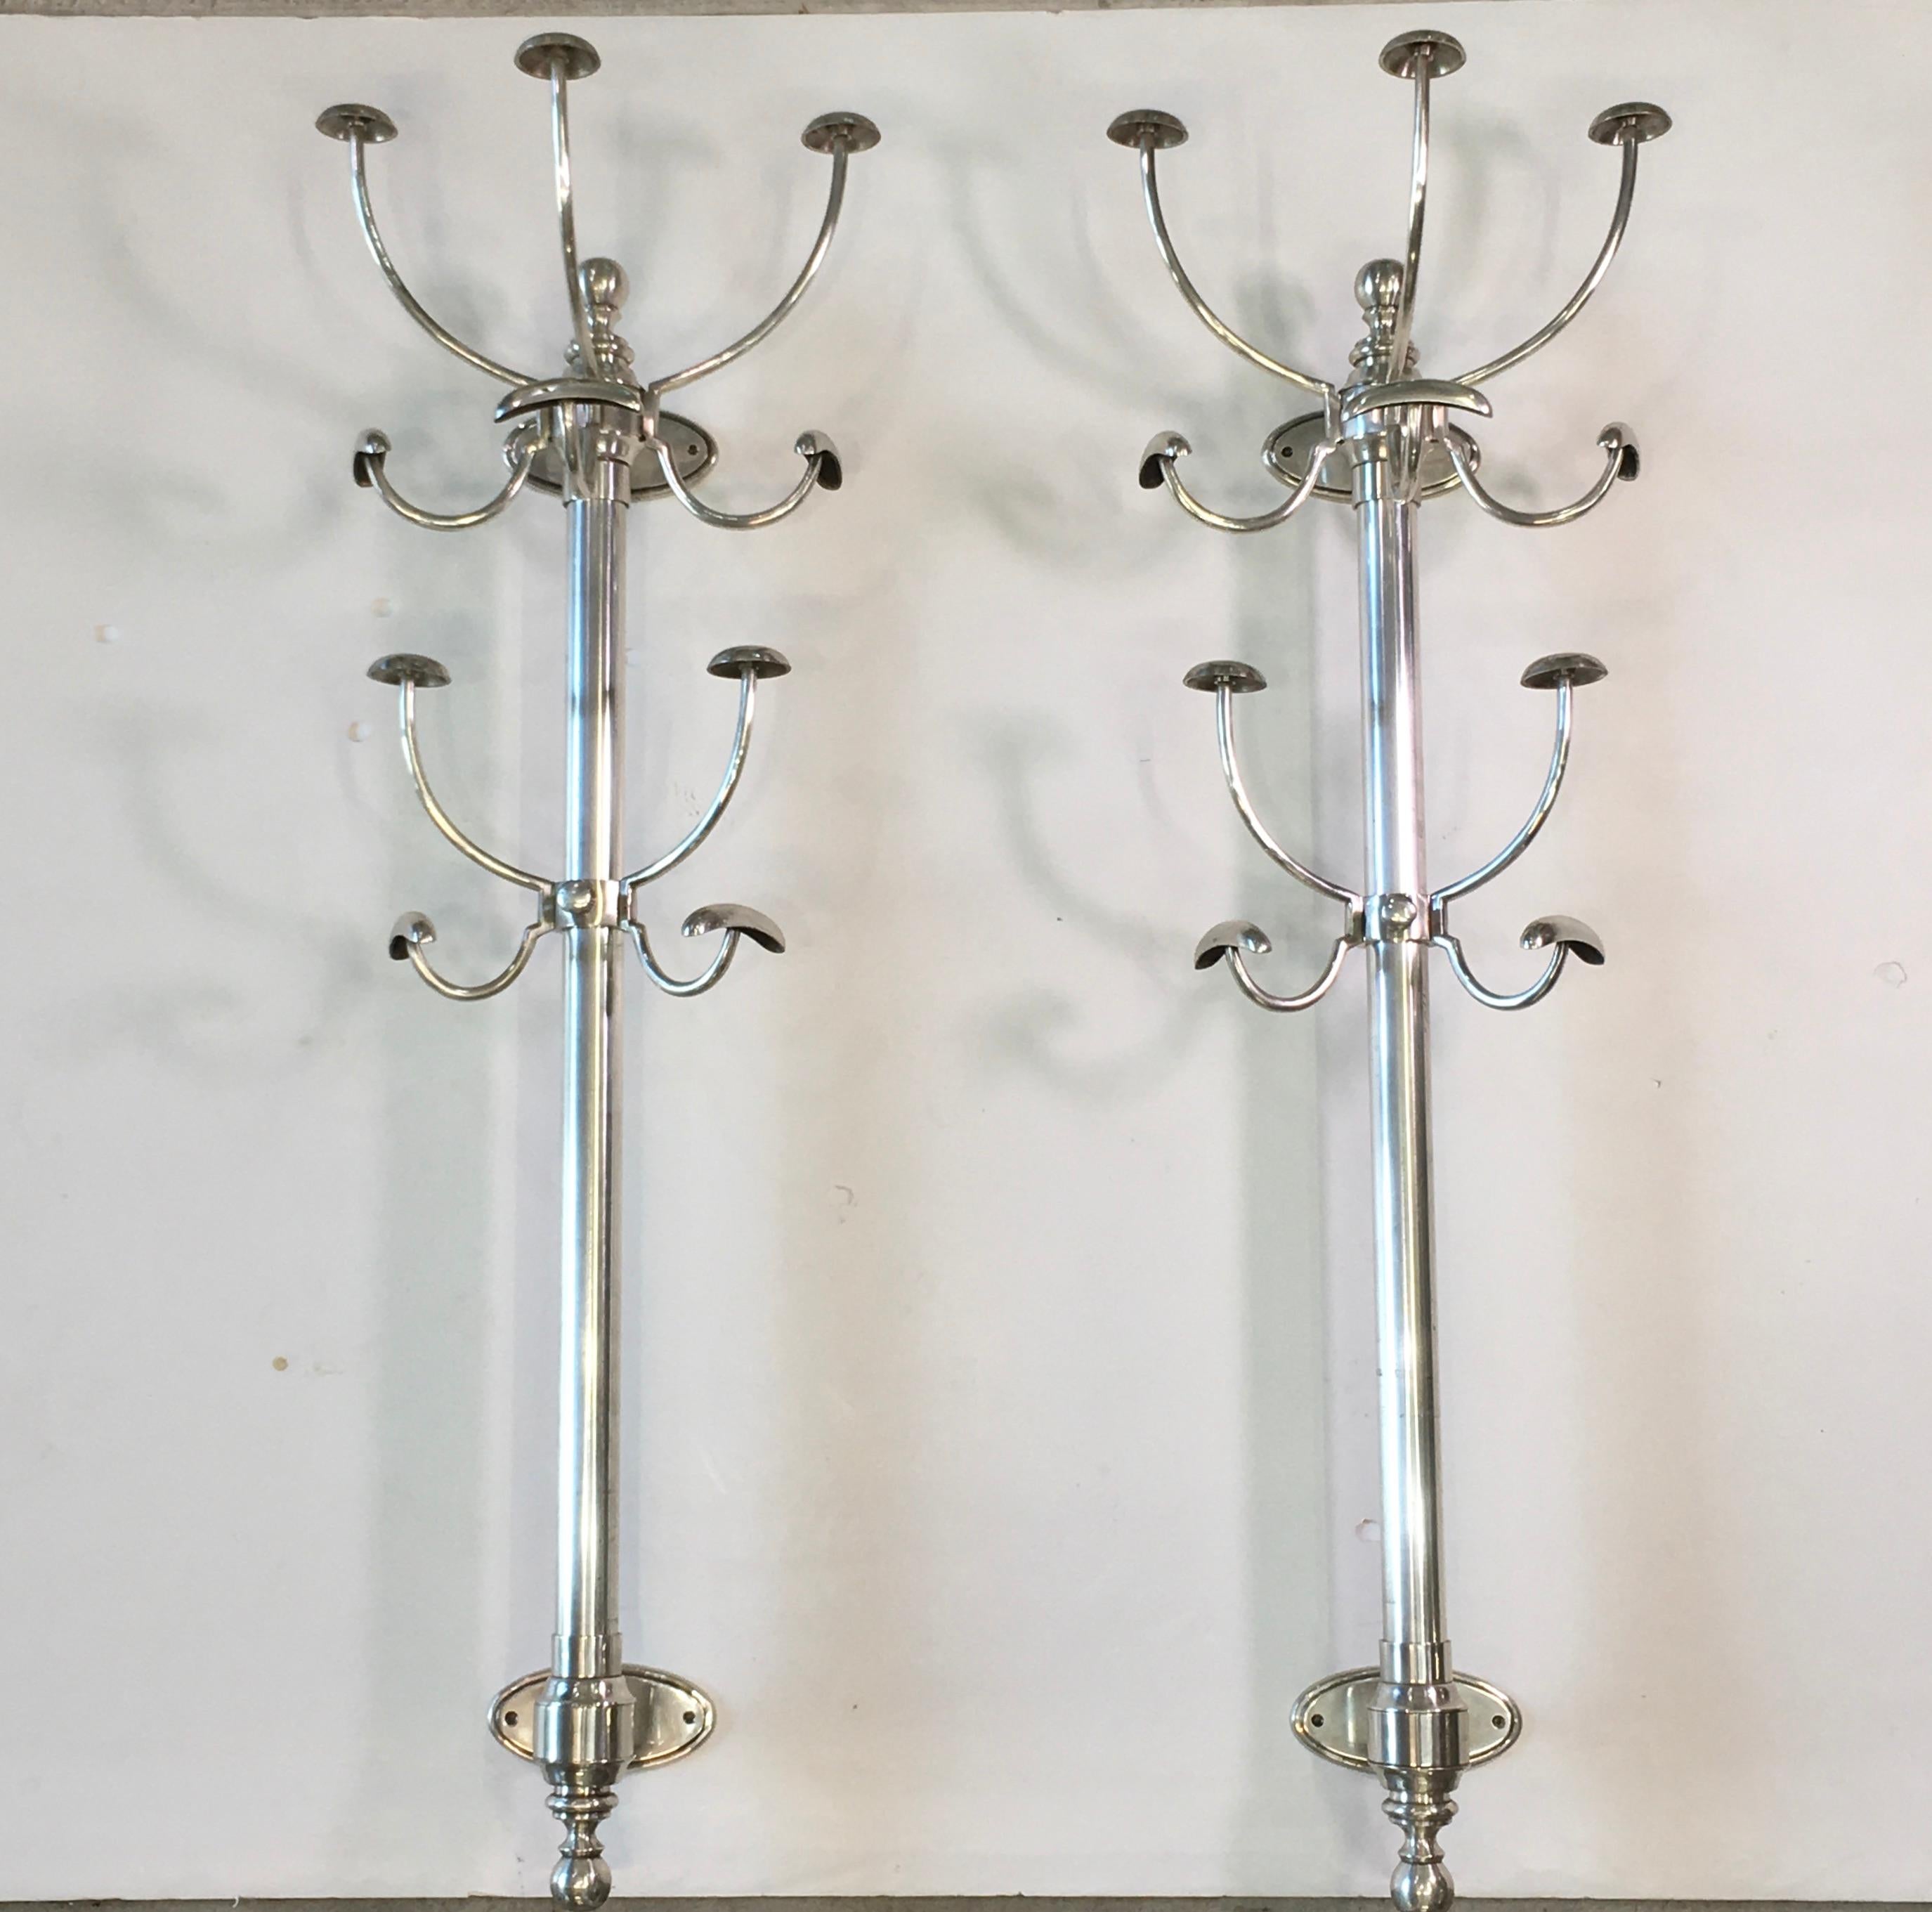 Pair of bracket mounted coat & hat trees made of nickel plated brass. These are high quality and heavy duty, like what you would have found in an old world gentleman's club. The lower set of hooks is height adjustable and simply slides up or down